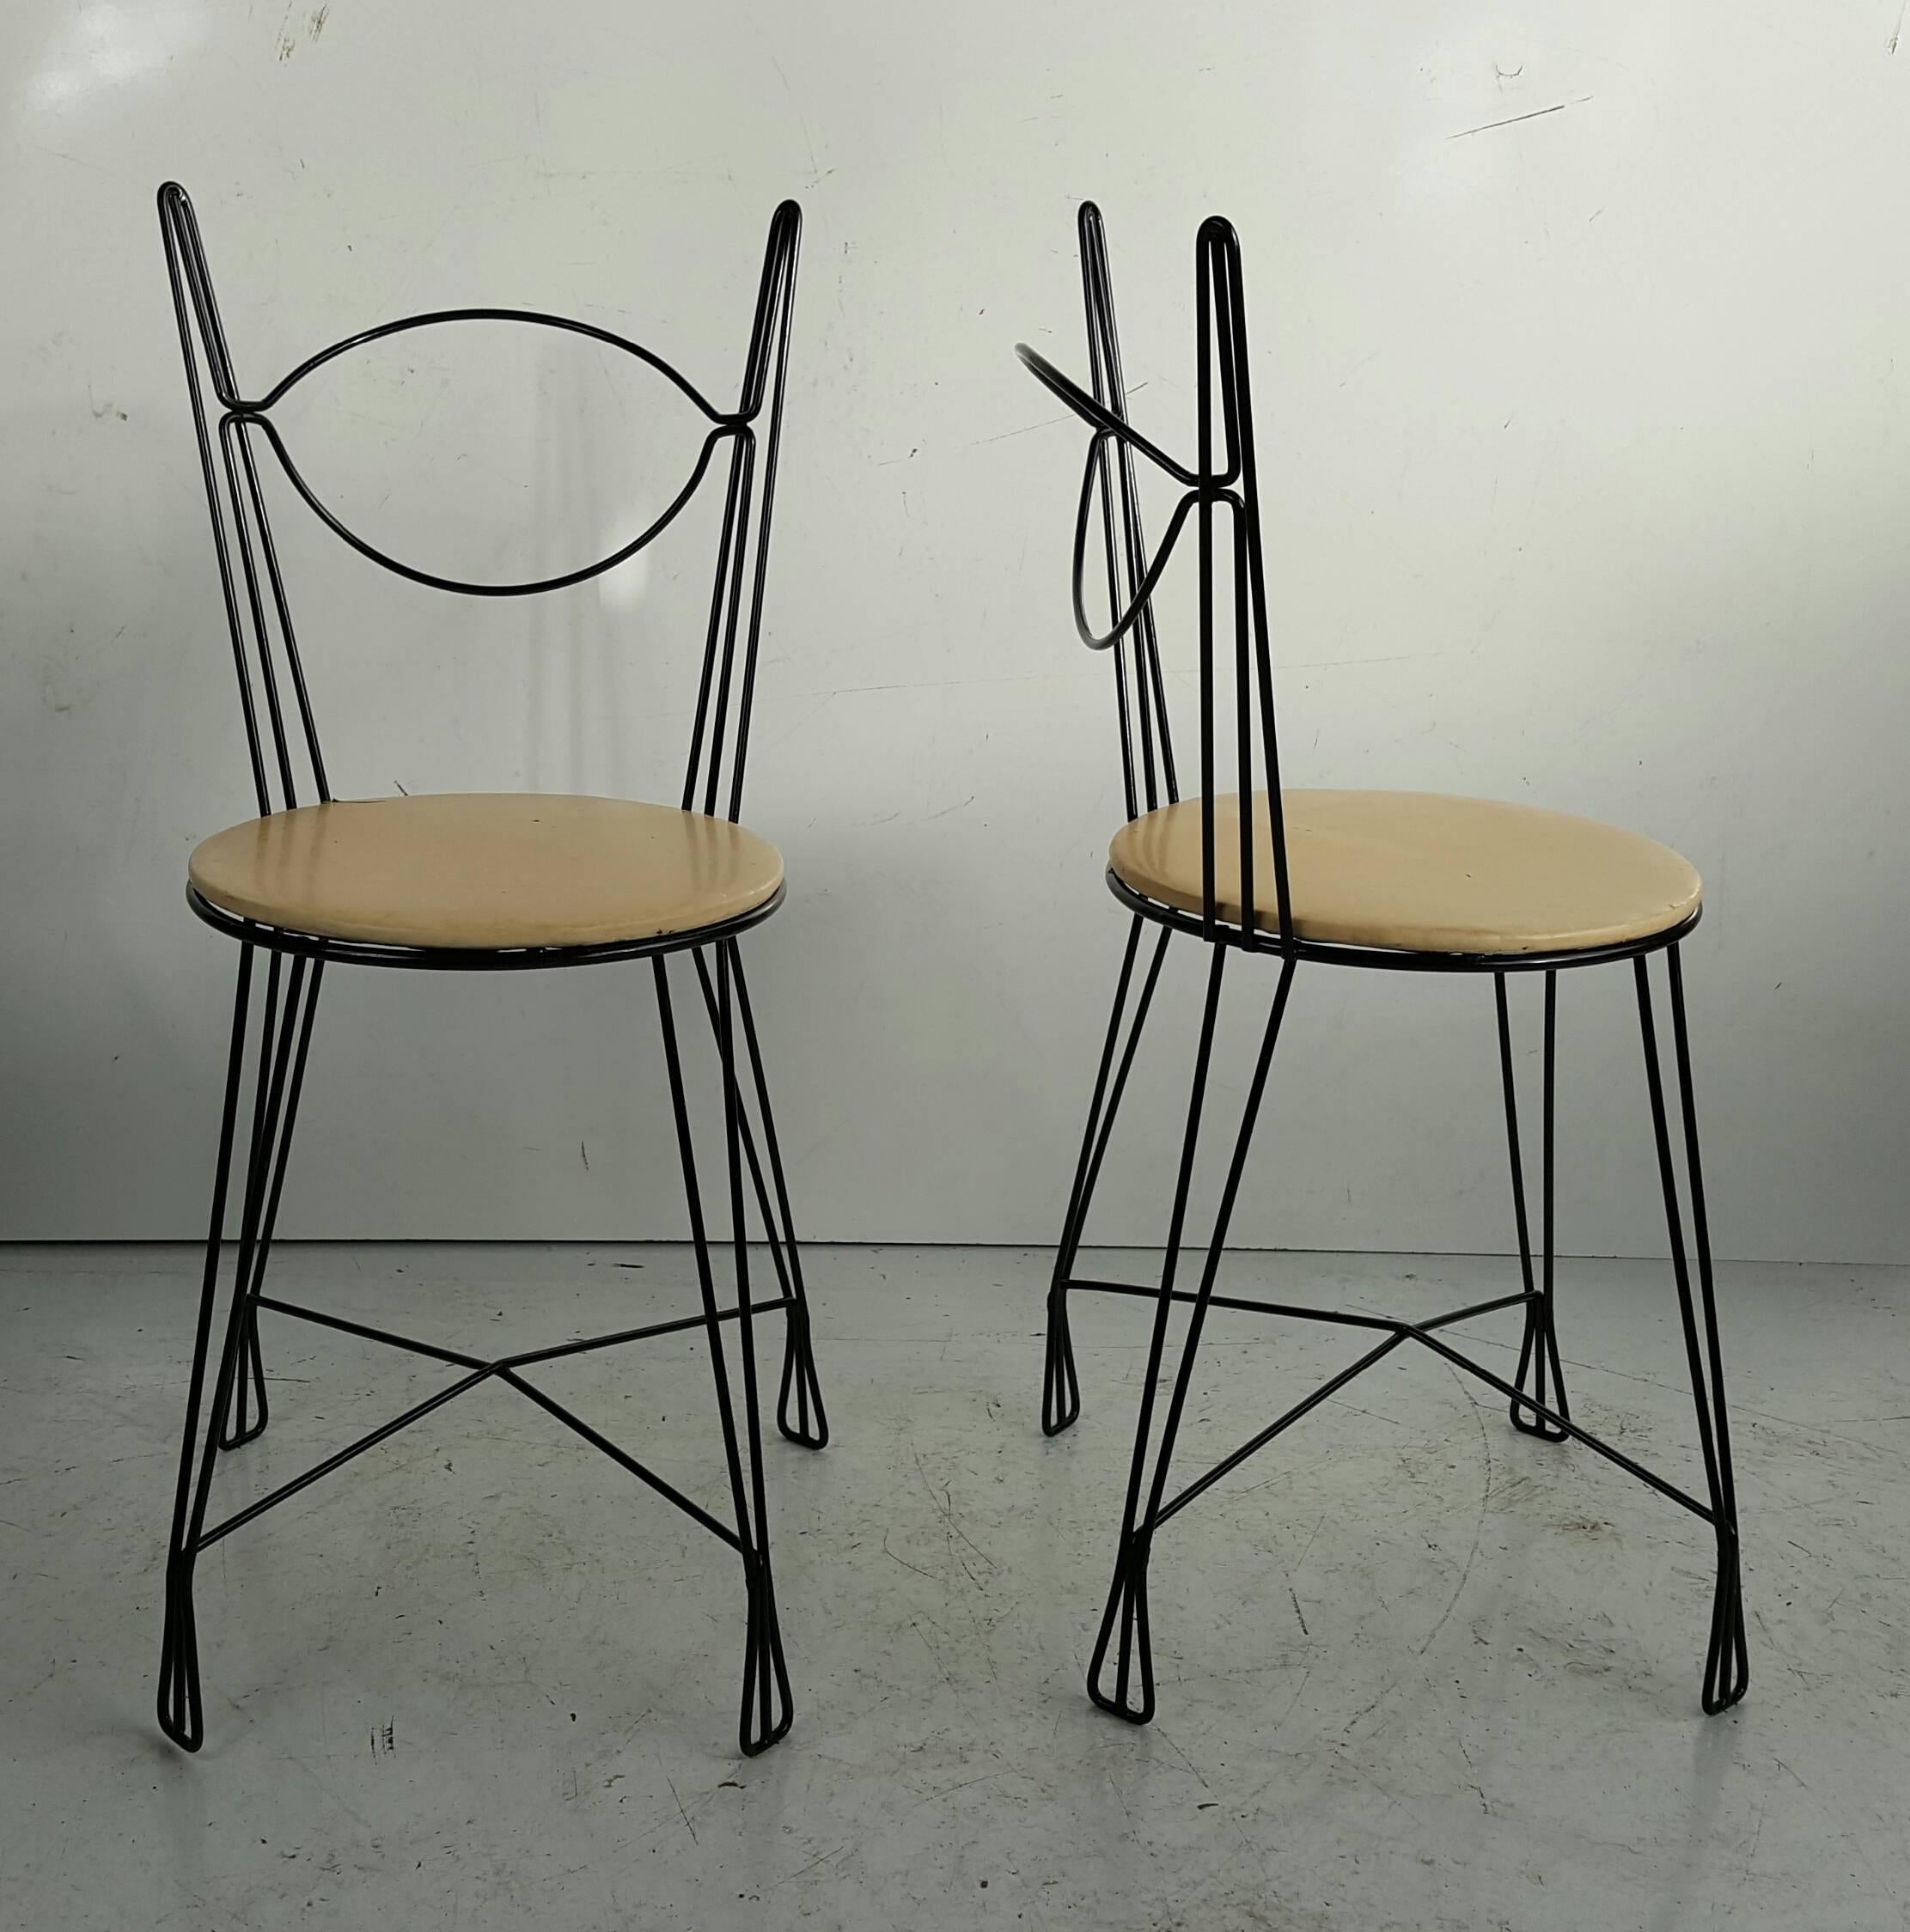 Nice pair of Tony Paul for Raymor twisted iron black metal chairs. Open metal framework, with four leg cross support. Round seat covered in original cream color vinyl.